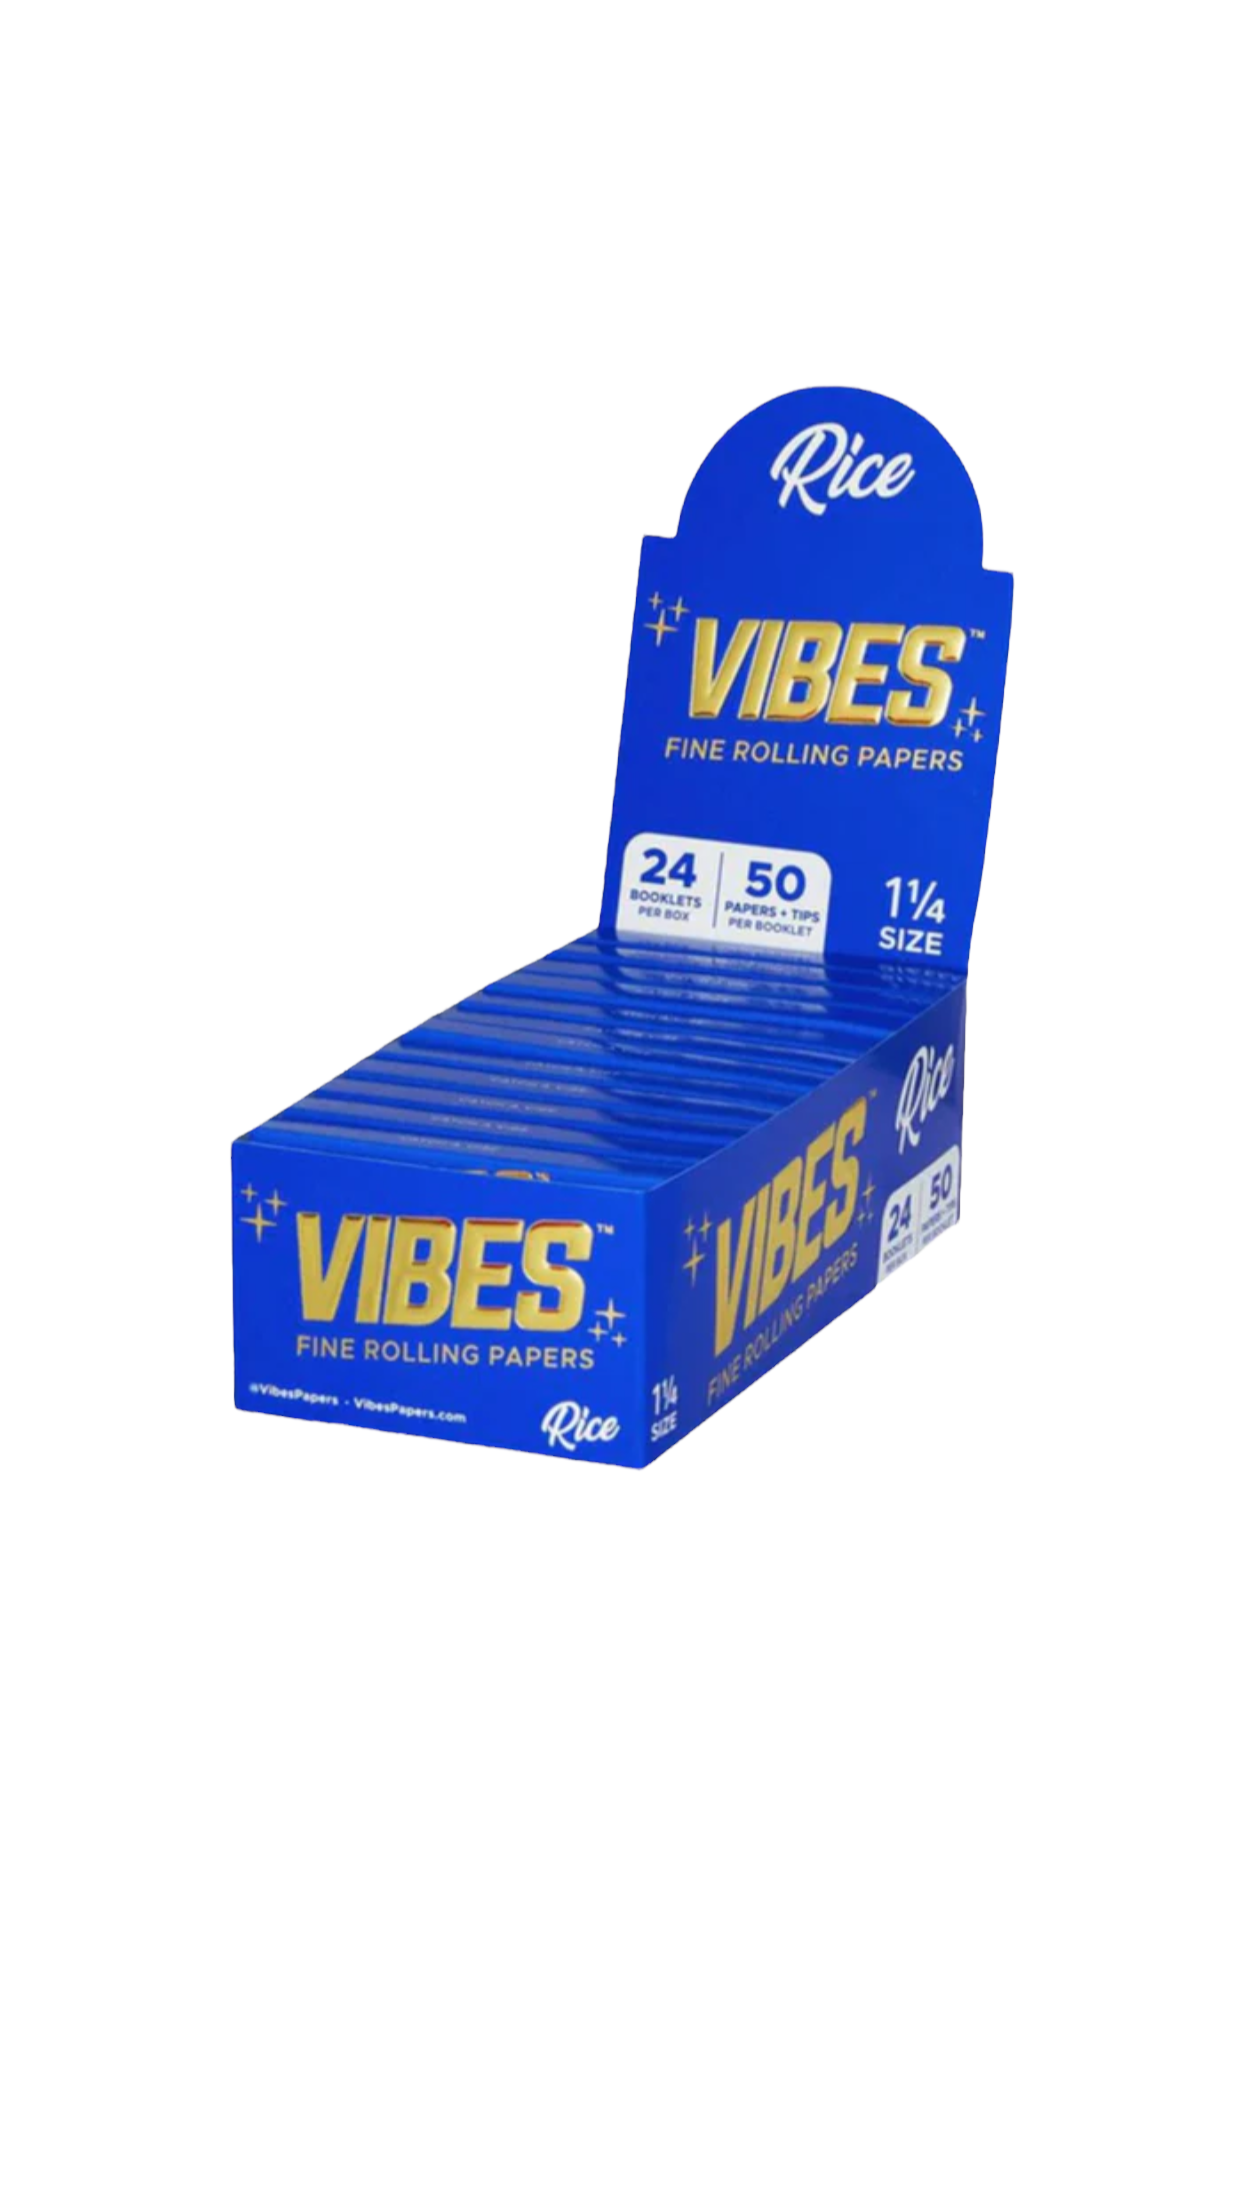 VIBES RICE PAPER WITH TIPS | 1 1/4 SIZE | 24PK